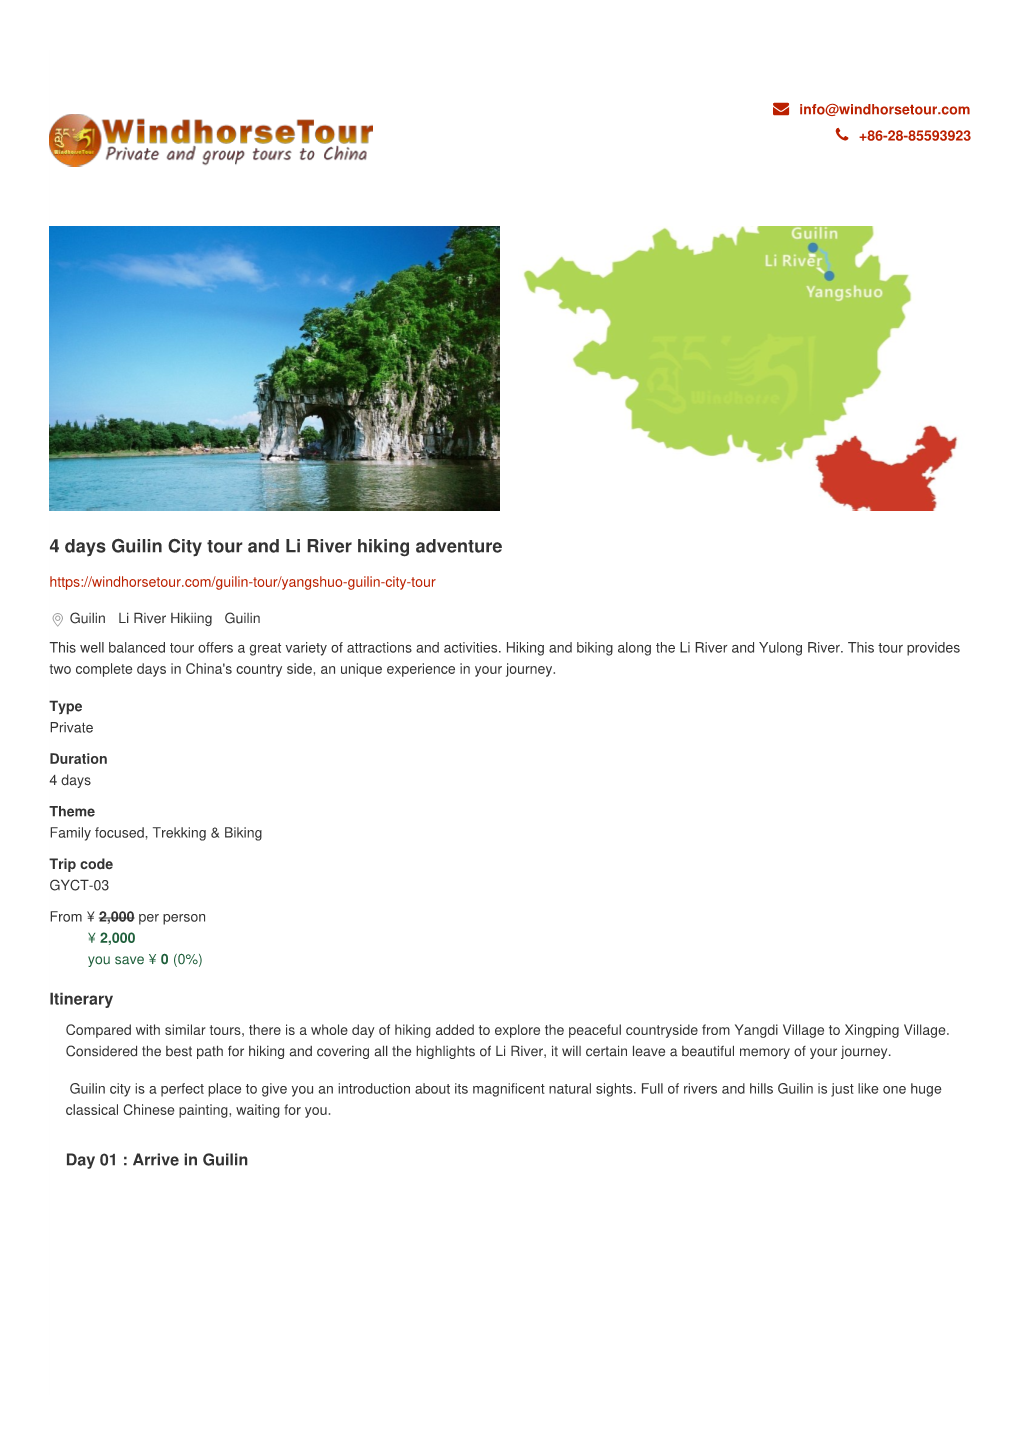 4 Days Guilin City Tour and Li River Hiking Adventure